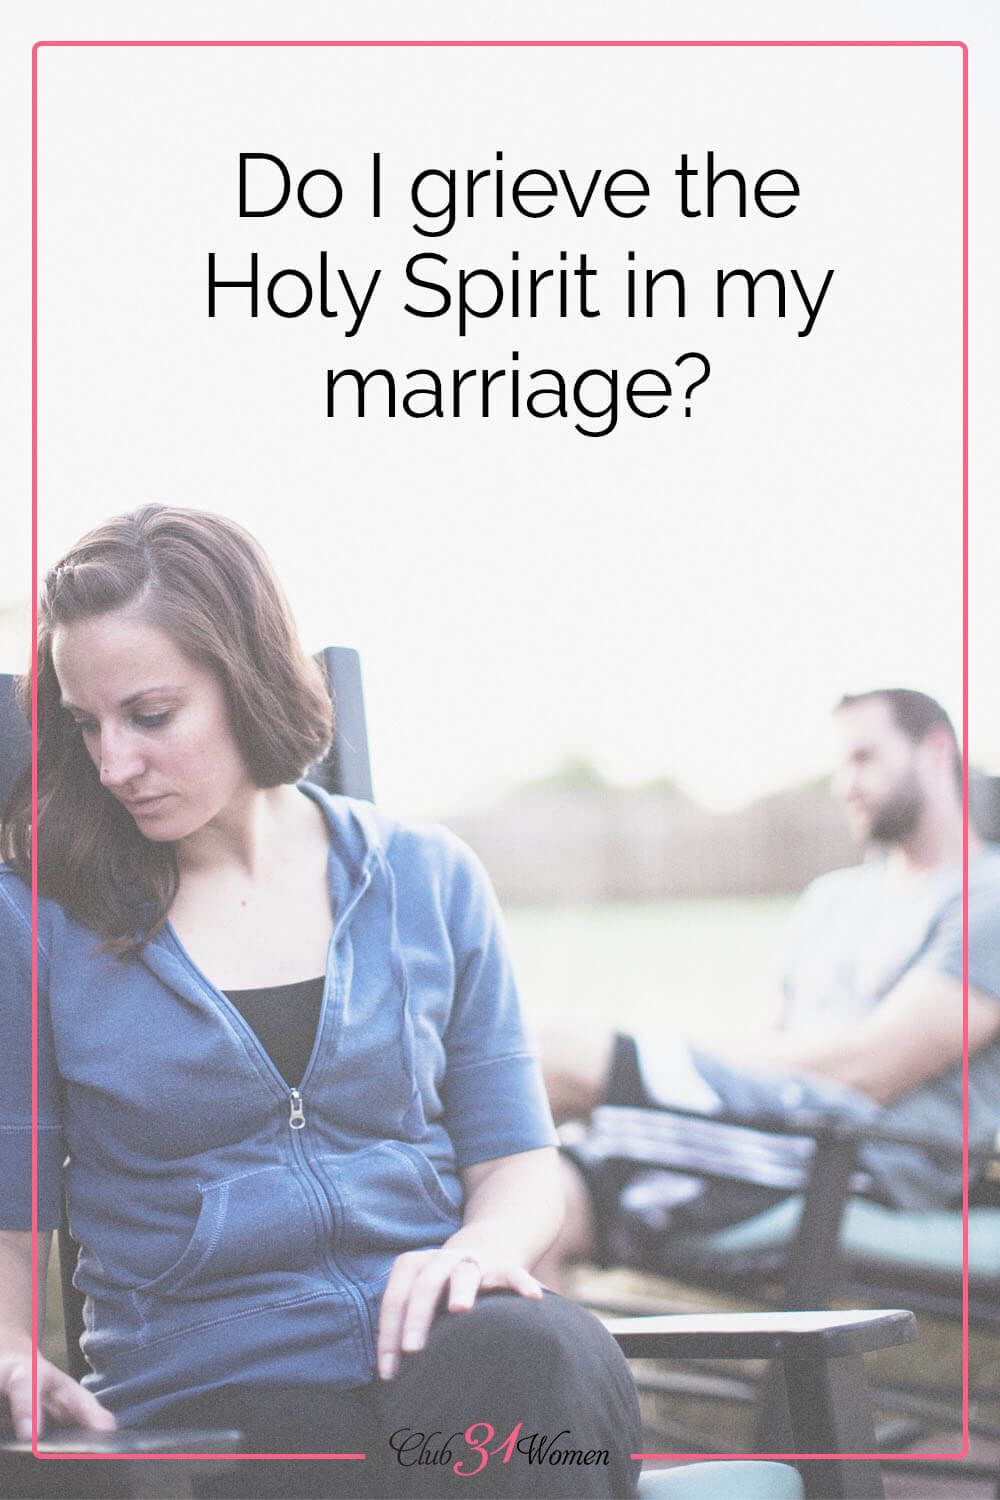 When we connect and remain connected, to the Holy Spirit, He transforms our hearts which transforms our connection with our husband. via @Club31Women